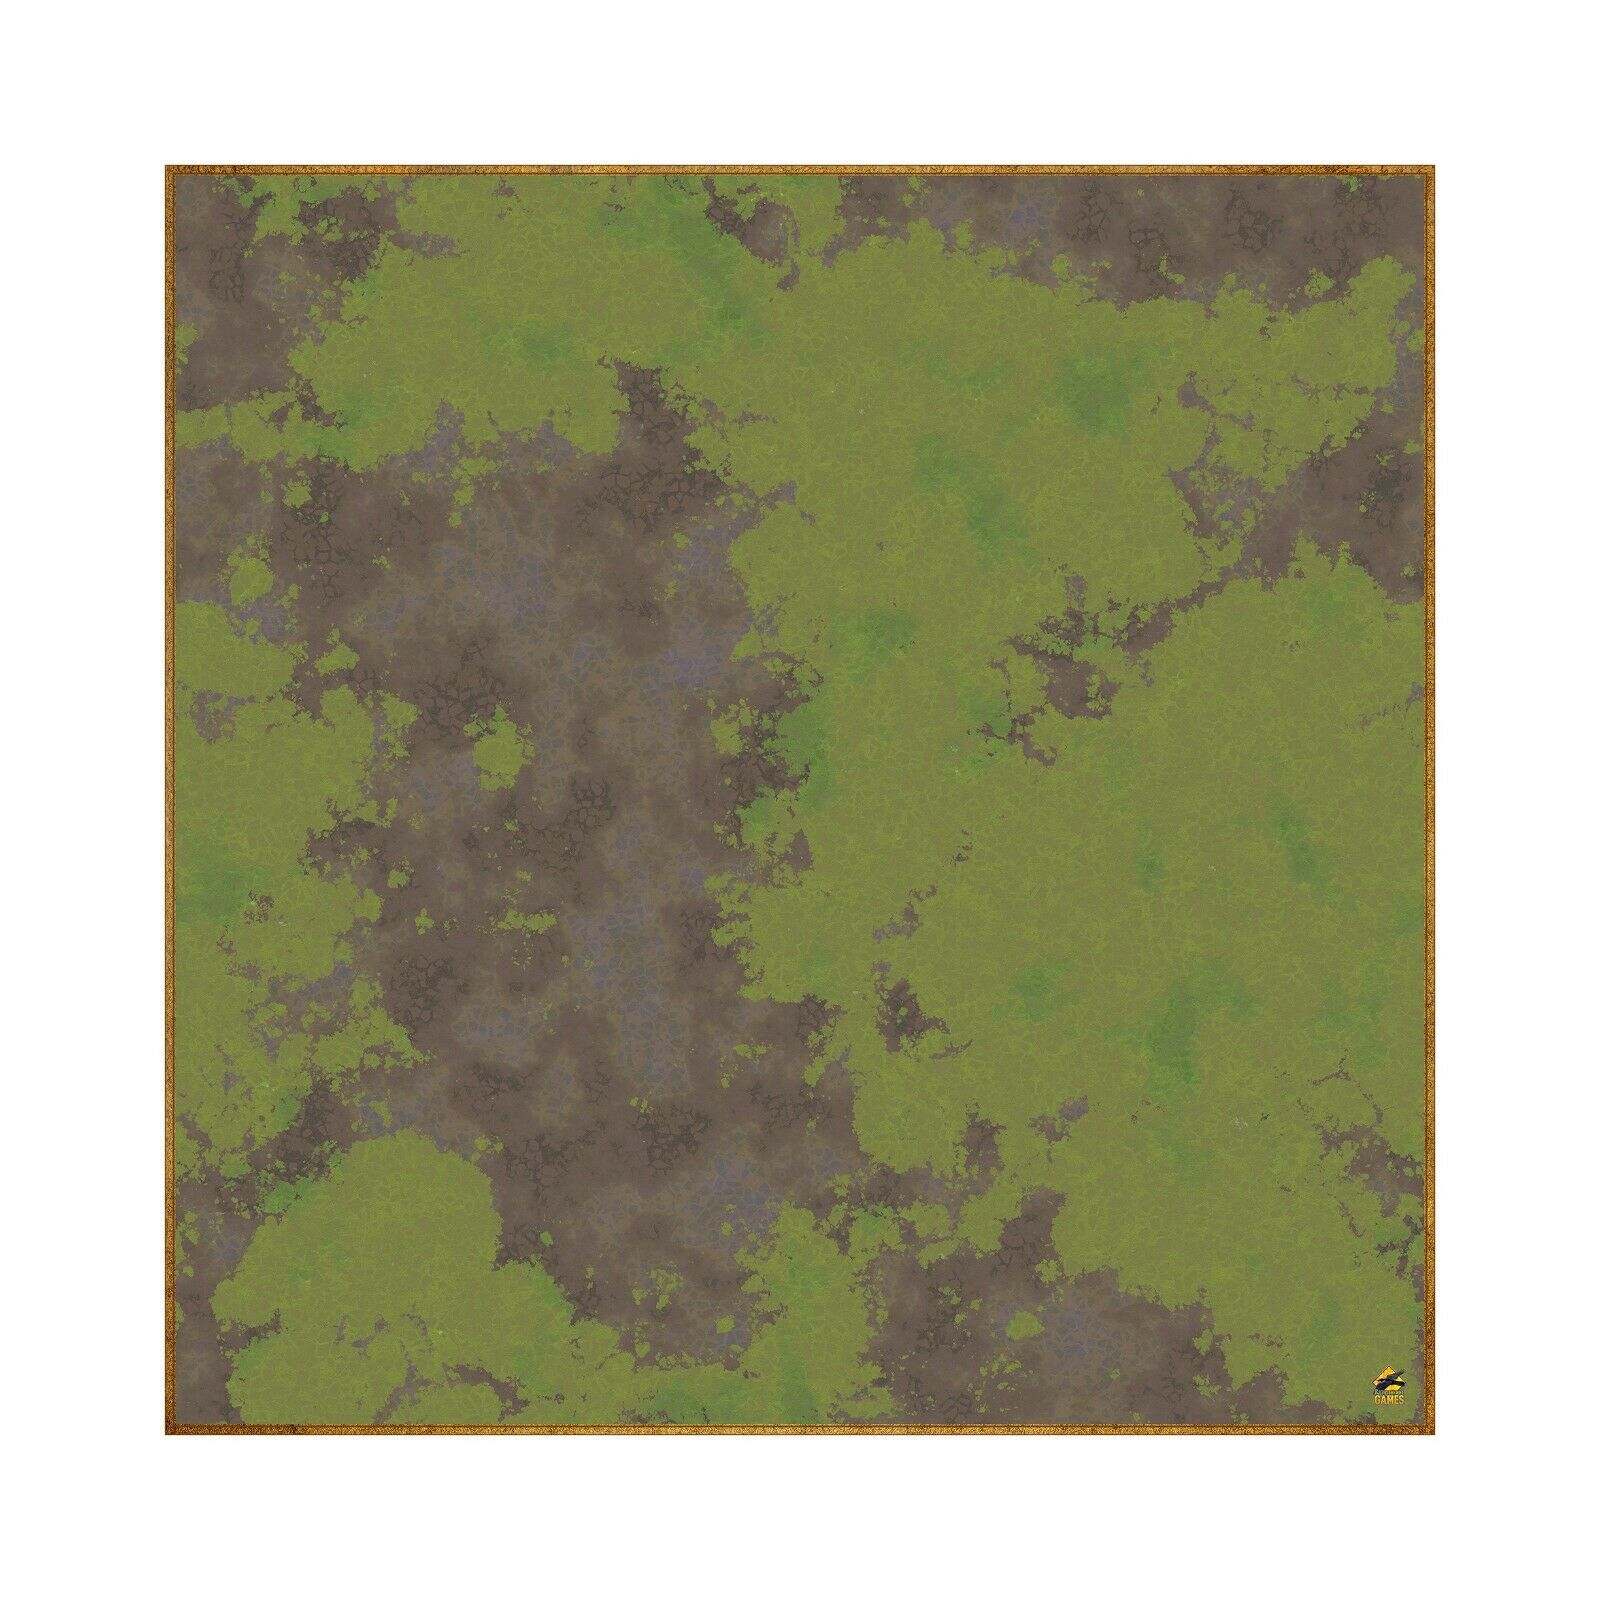 Mud and Moss Covered Flagstone - 36" x 36" Battle Mat for Table Top RPGs, Dungeons and Dragons, Pathfinder Etc.